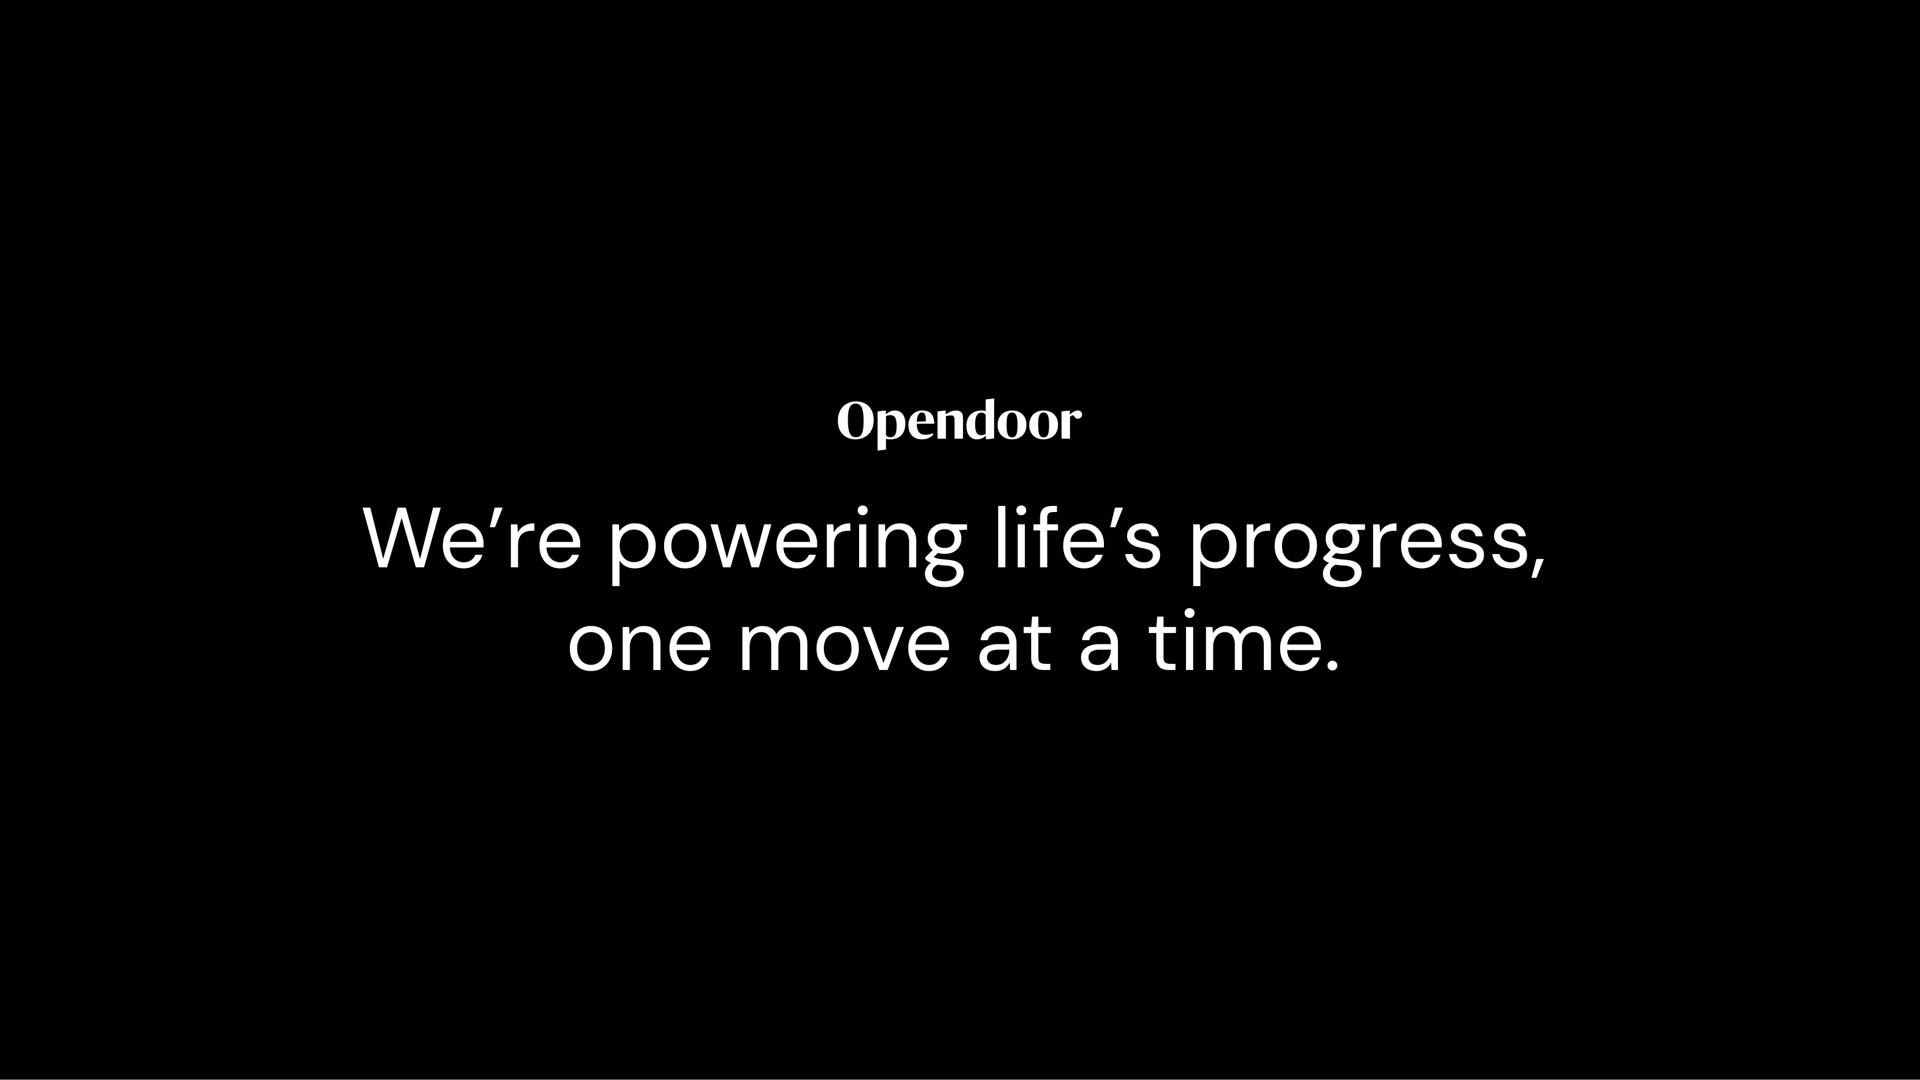 we powering life progress one move at a time | Opendoor